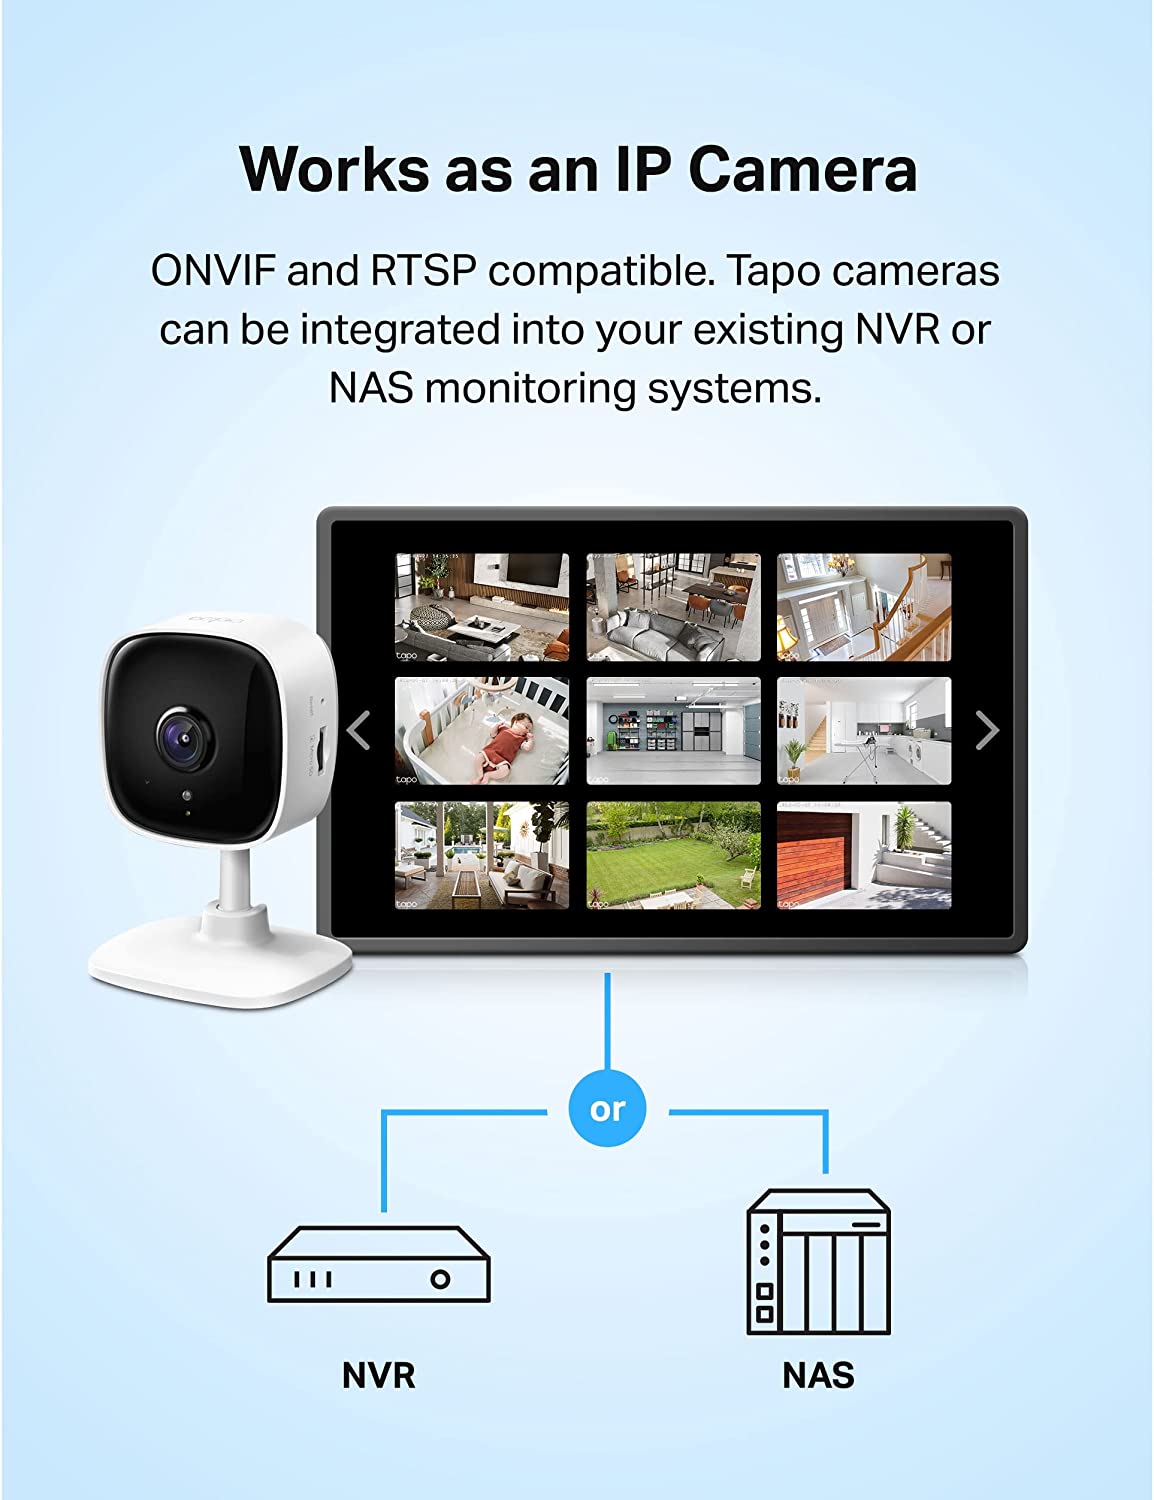 TP-Link Tapo 2K QHD Security Camera, Indoor/Outdoor, 𝟮𝟬𝟮𝟰 𝗣𝗖𝗠𝗮𝗴  𝗘𝗱𝗶𝘁𝗼𝗿'𝘀 𝗖𝗵𝗼𝗶𝗰𝗲, Color Night Vision, Free Person/Pet/Vehicle  Detection, Invisible IR